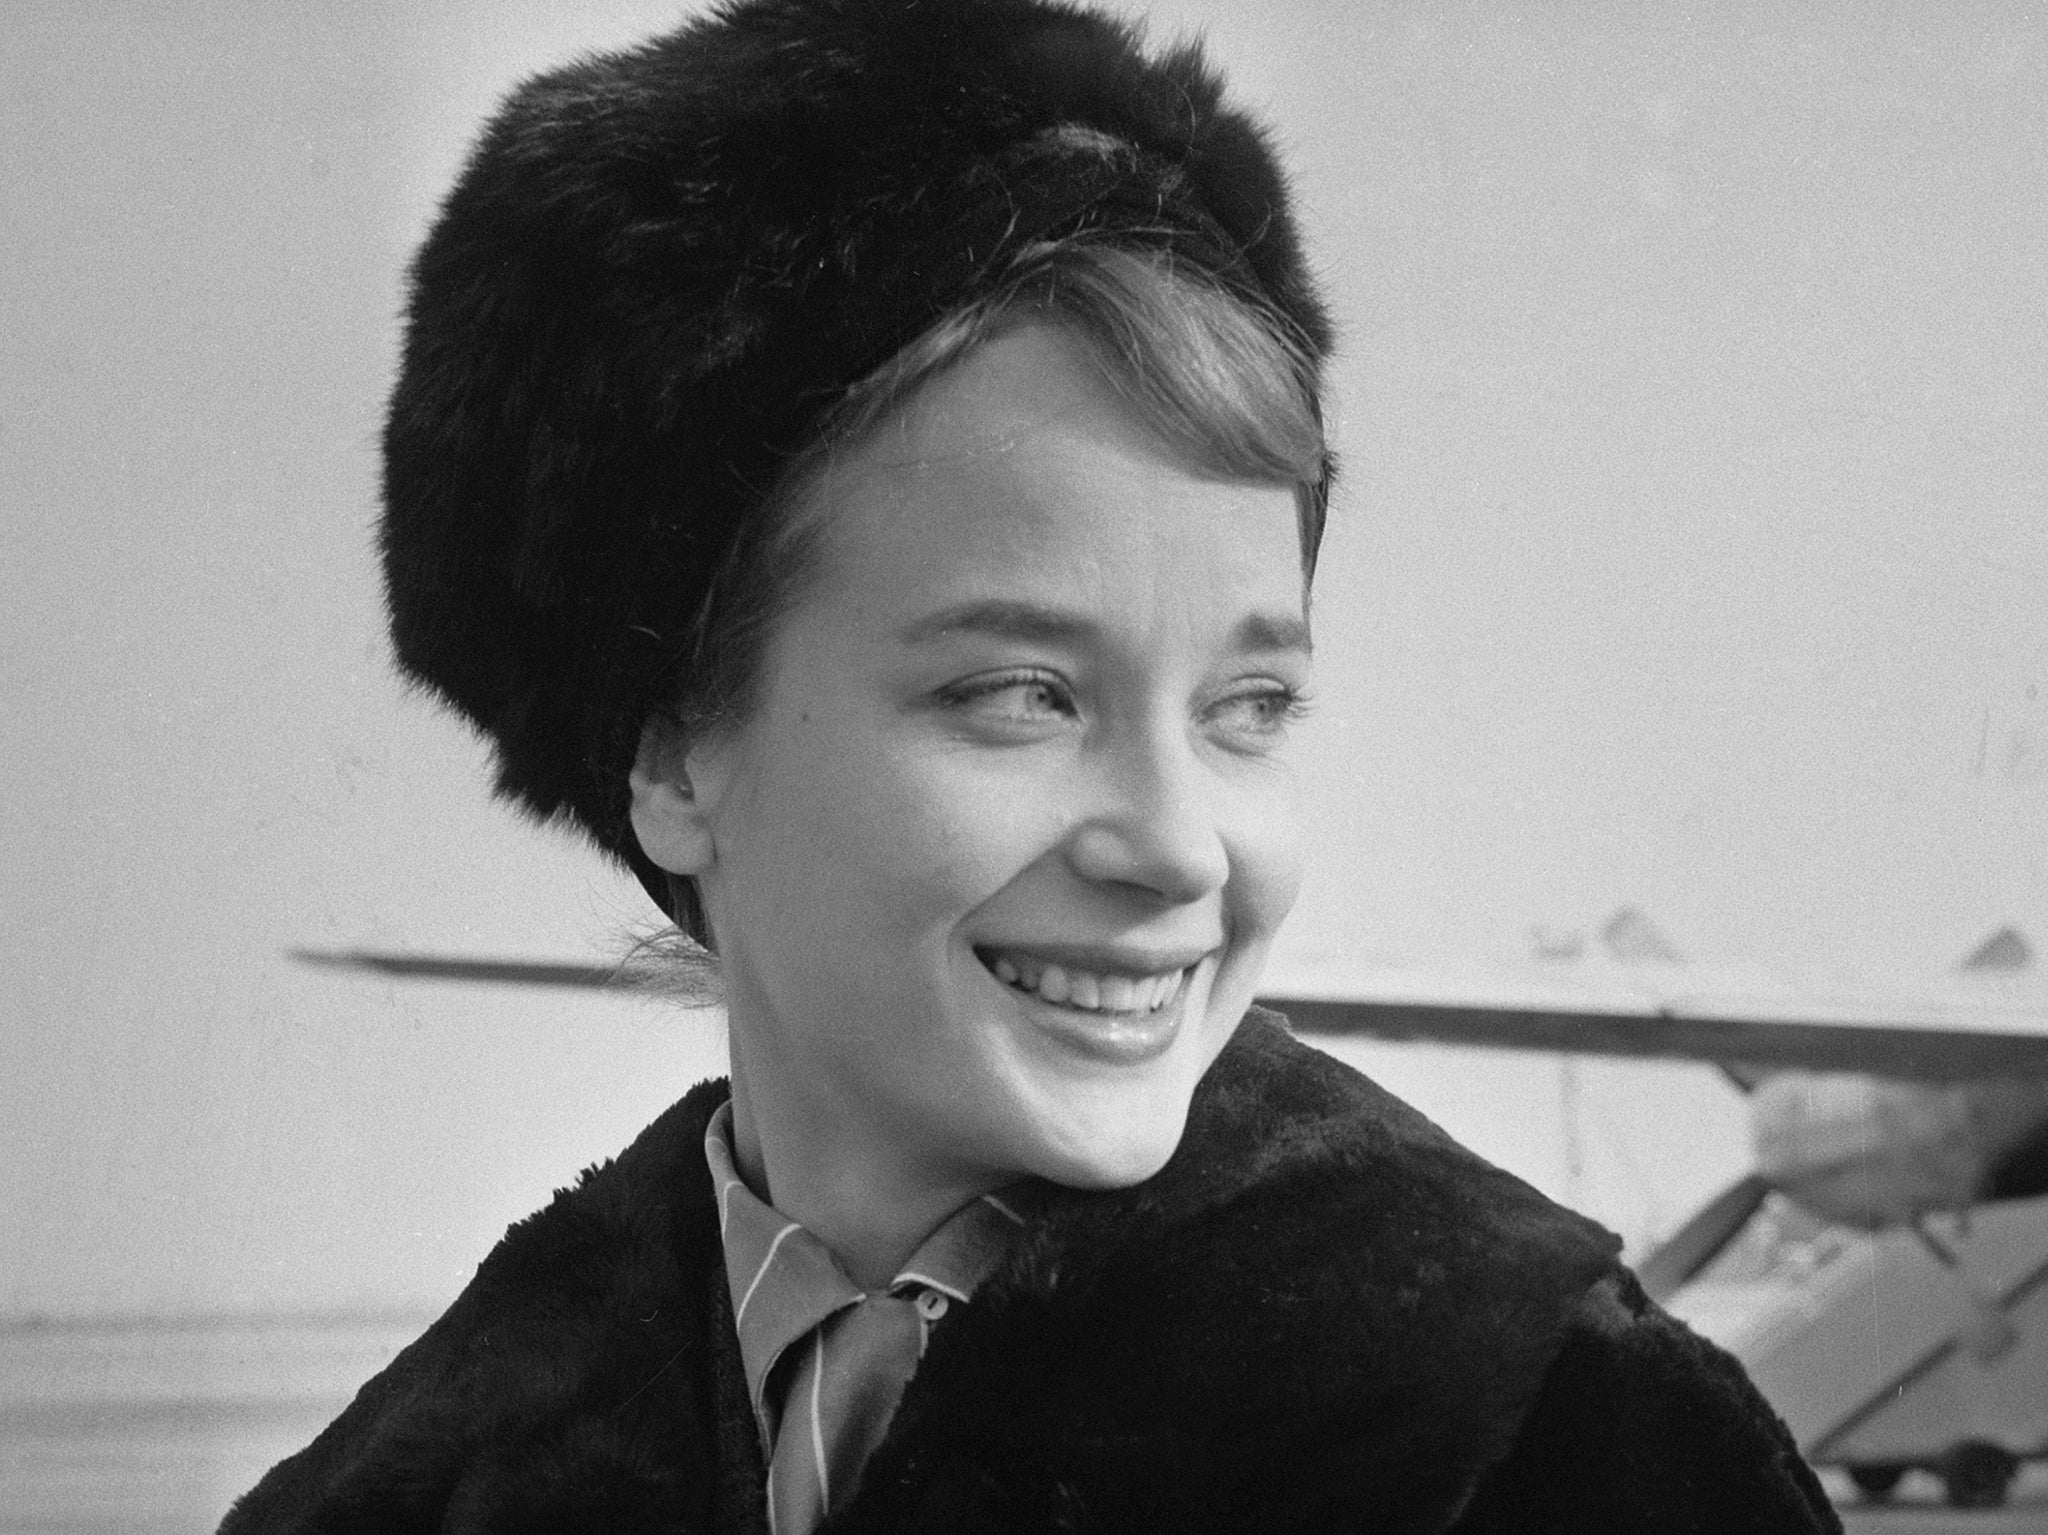 Sylvia Syms photographed at an airport in November 1960: ‘I wish I had known how beautiful I was when I was beautiful’